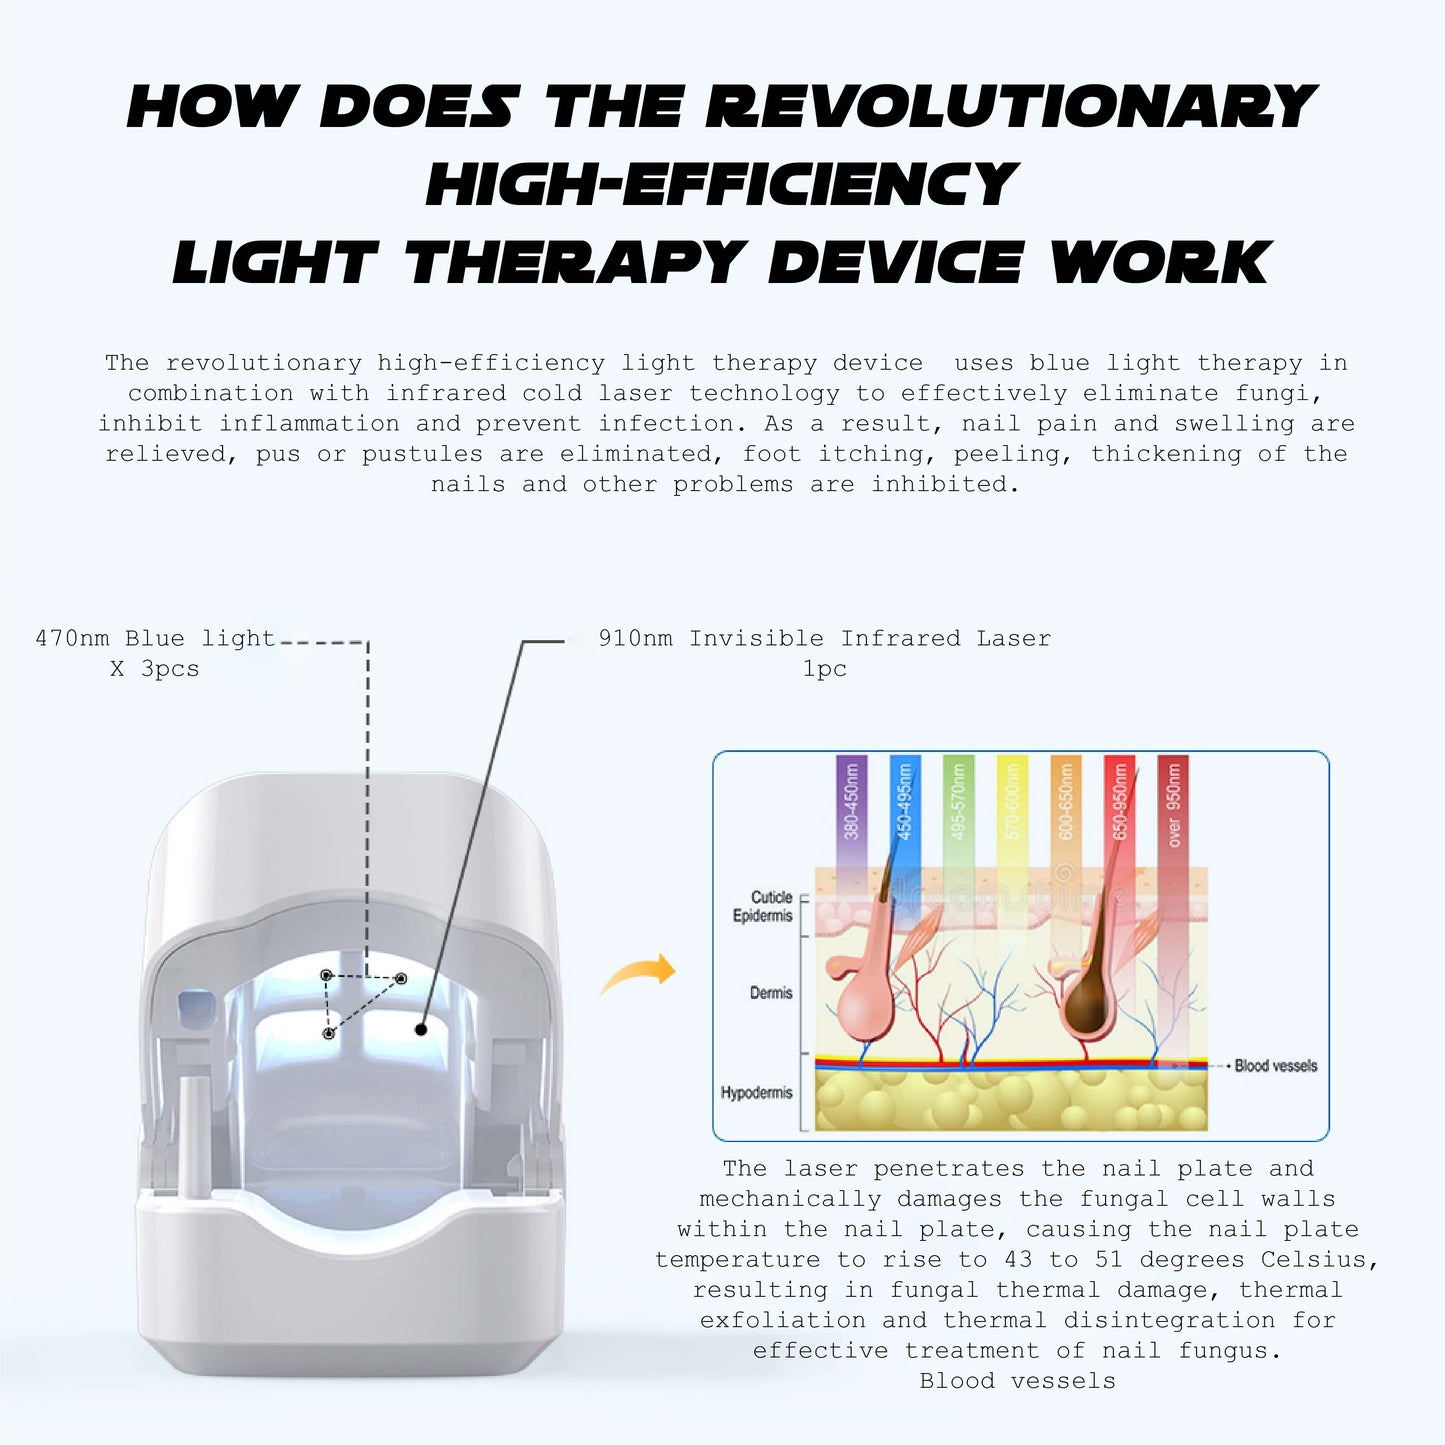 Ricpind NailFungal CleaningLaser TherapeuticDevice